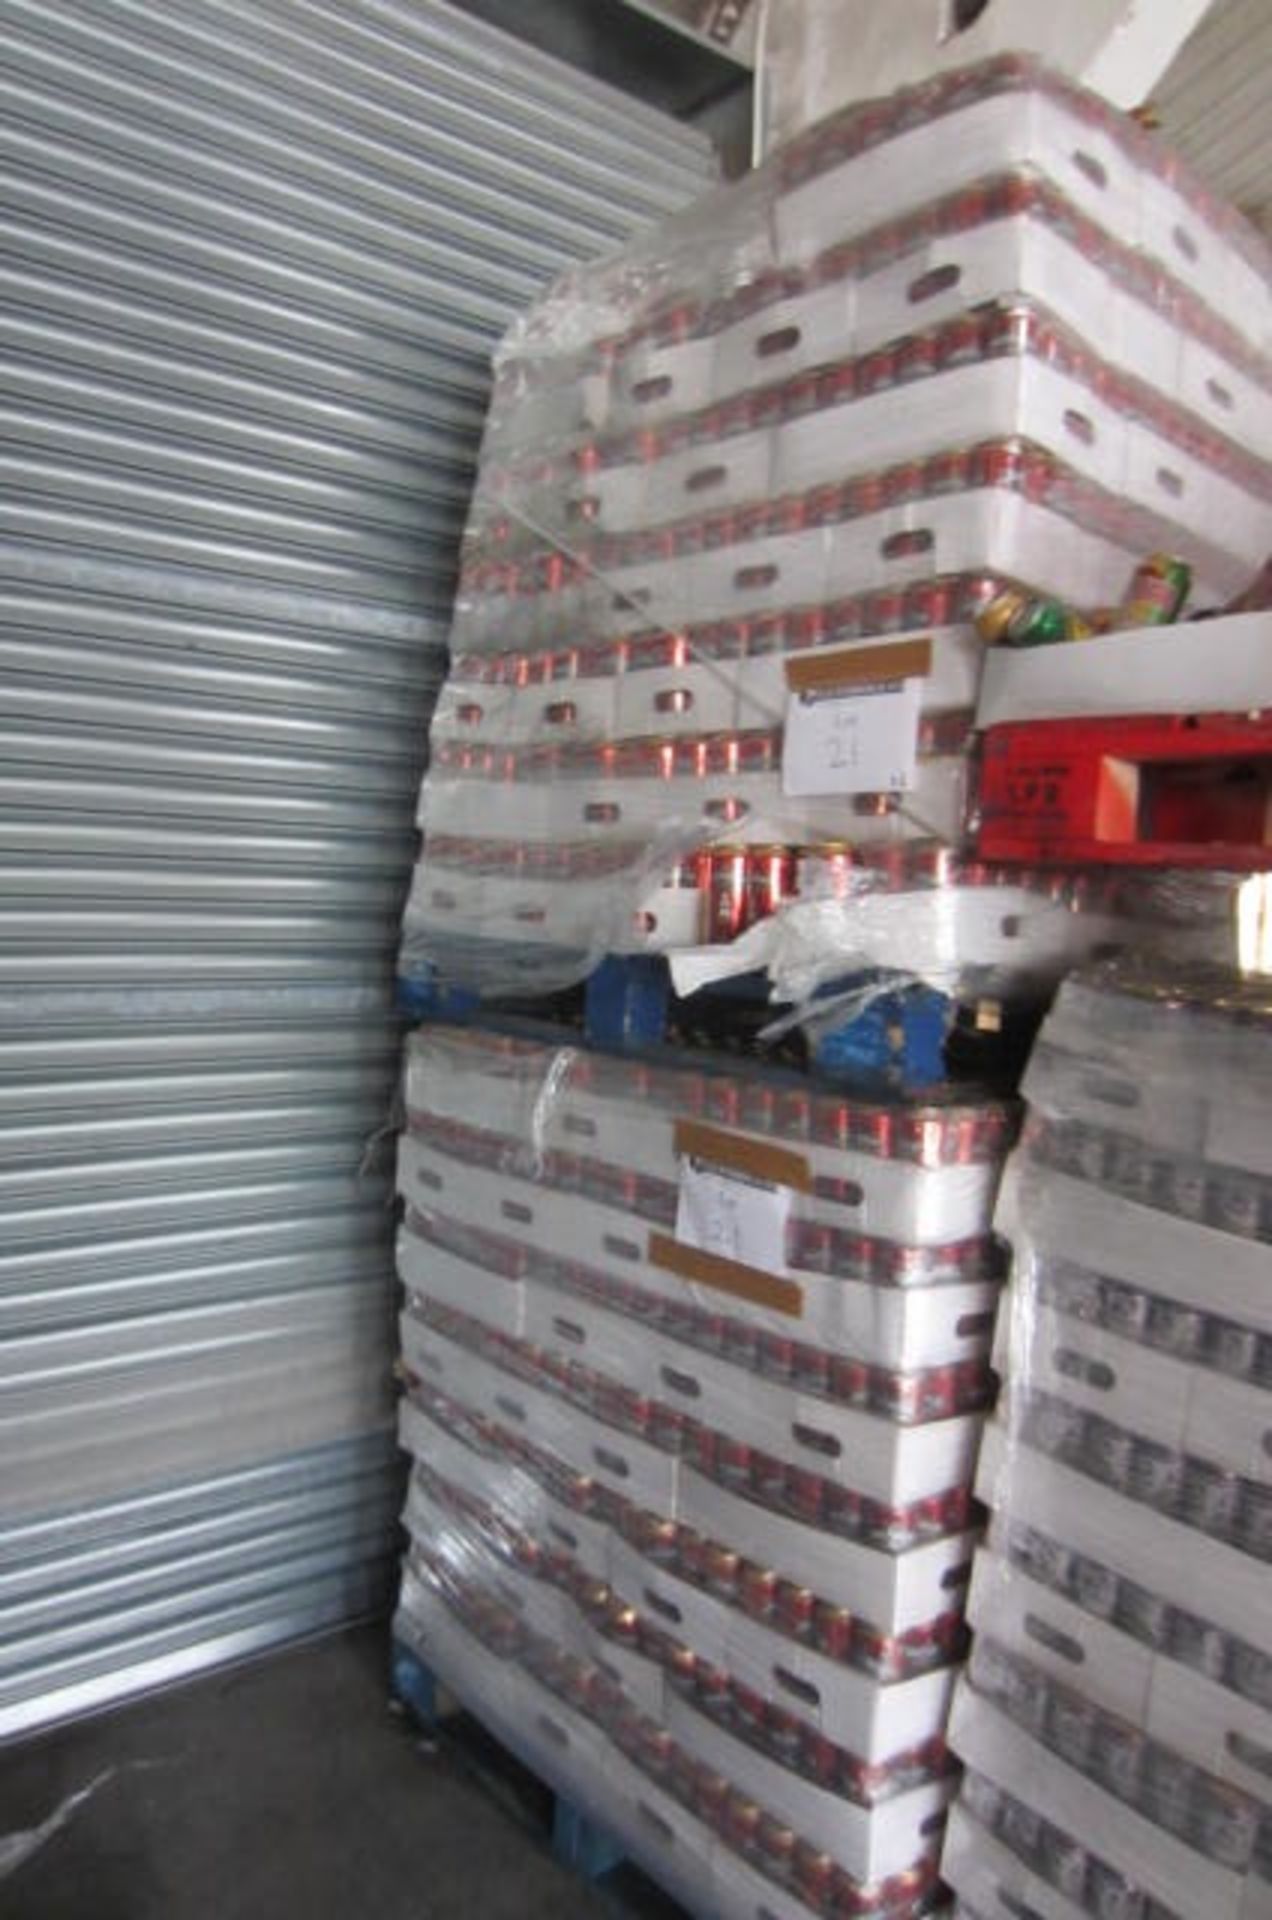 2 x Pallets of 63 x 24 x 500ml Cans of Amsterdam Navigator Extra Intense beer, 8% alc.